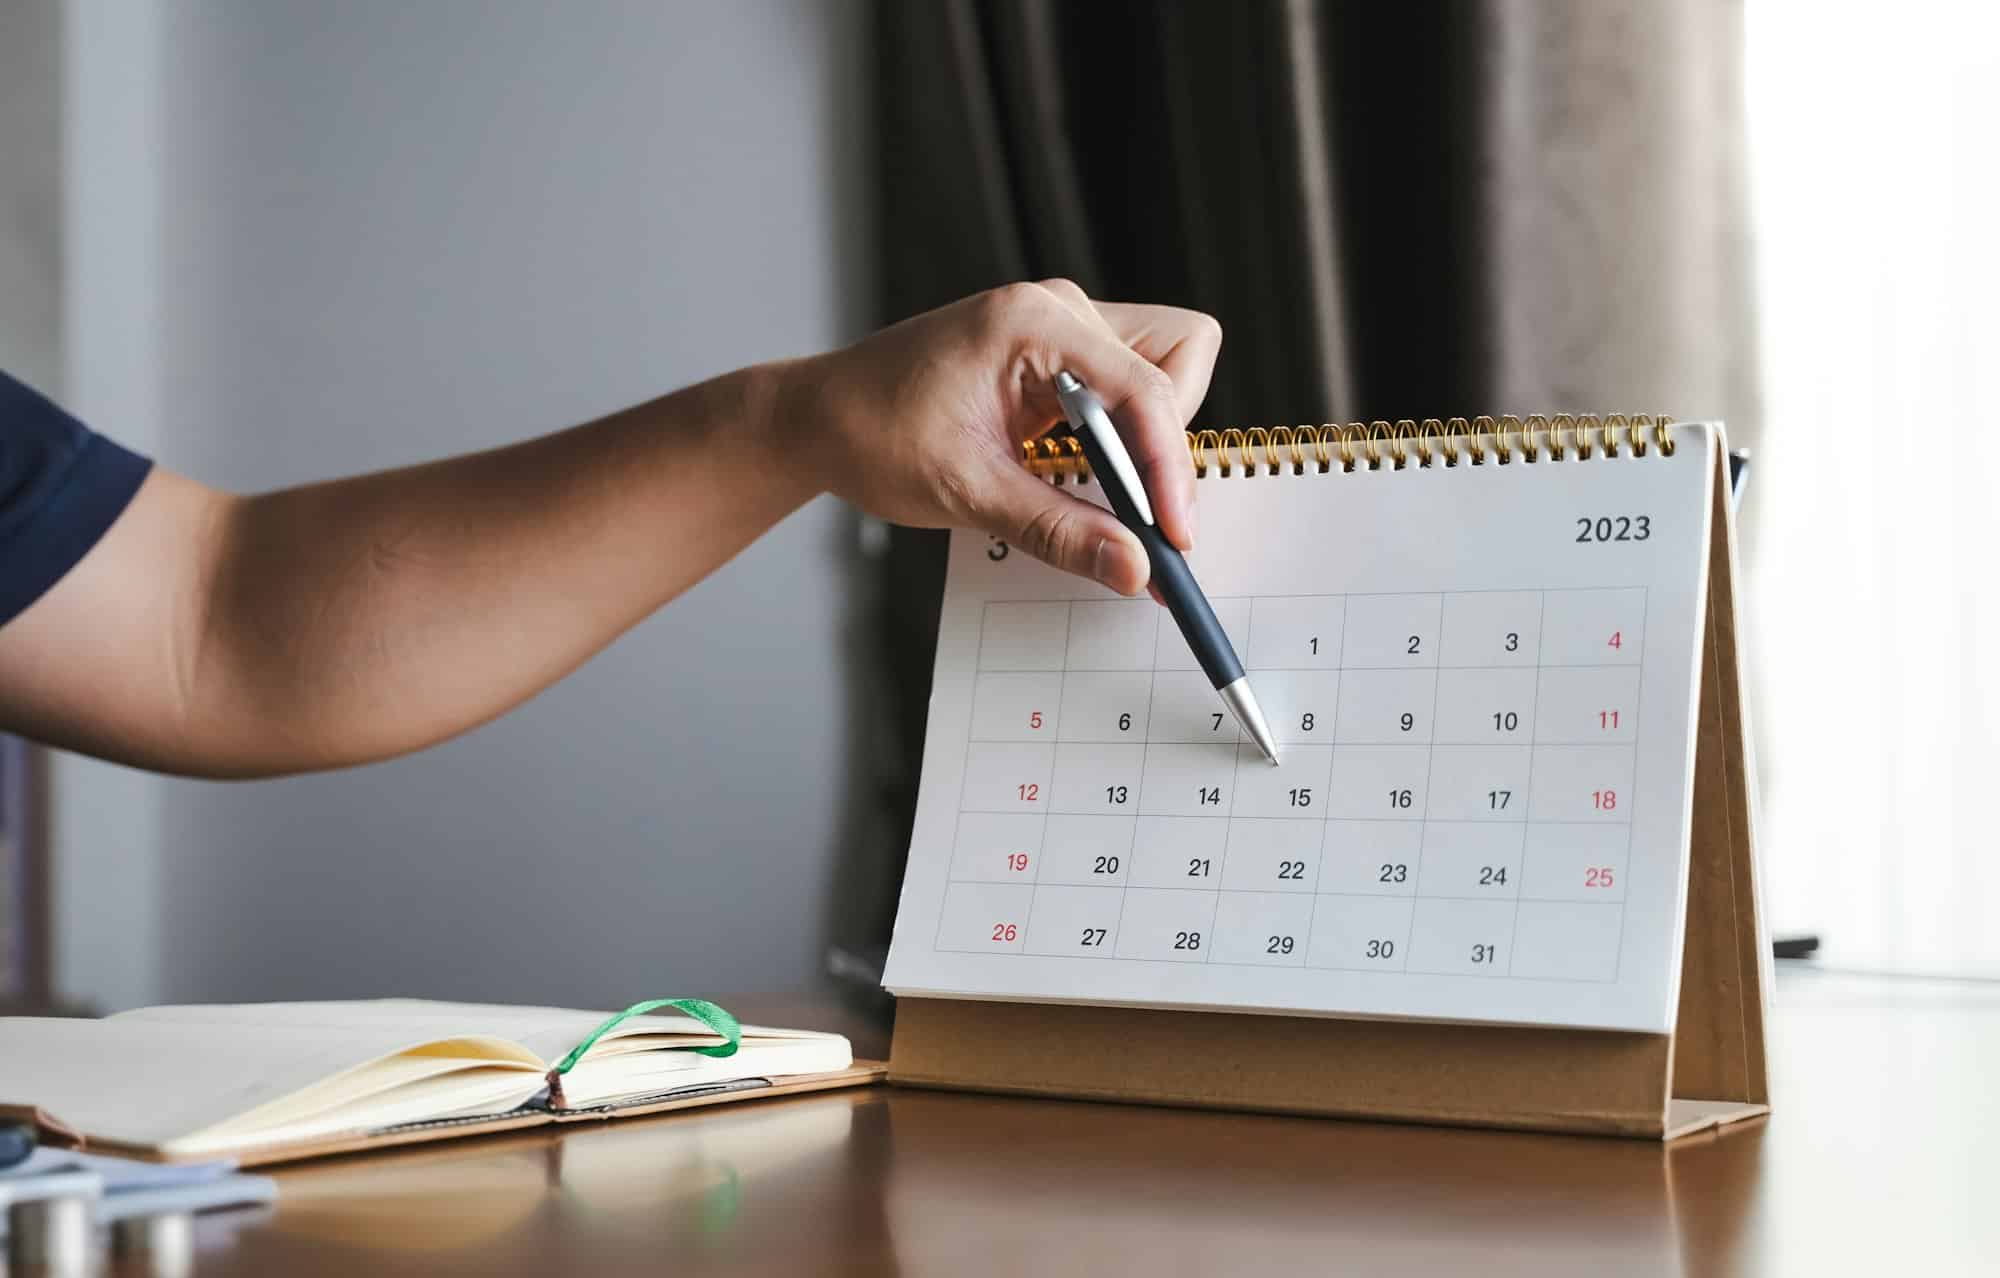 Effective planning and preparation for lunch with clients is crucial to making a positive impression seen here is a man at his desk pointing at a date on his desk calendar with his pen